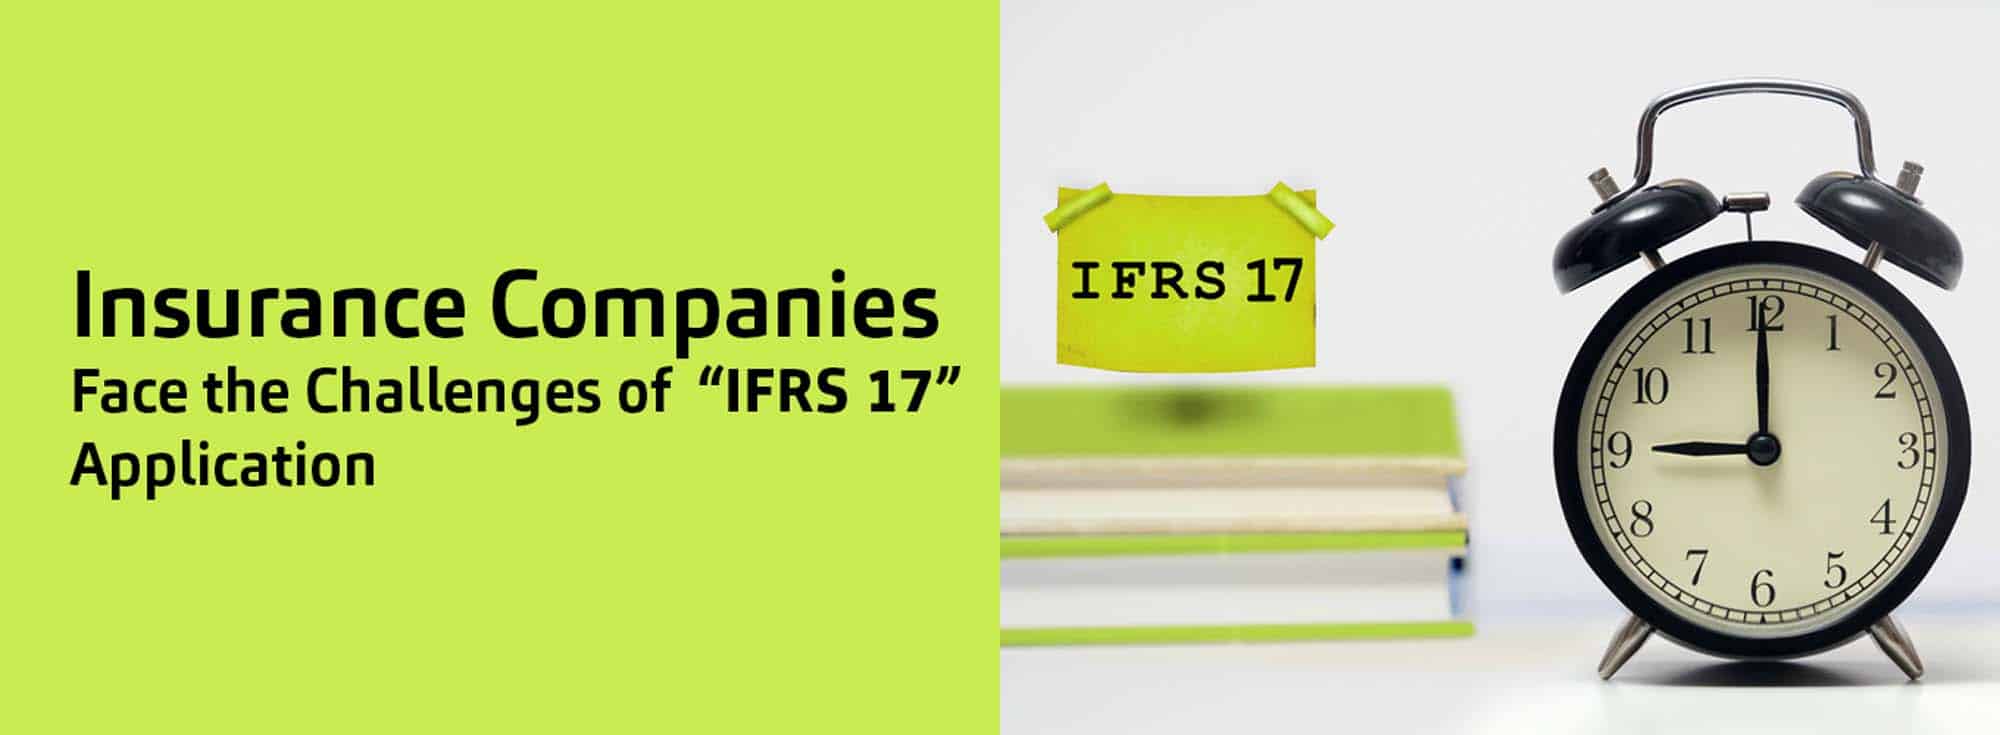 Insurance Companies Facing Challenges of Application of IFRS 17